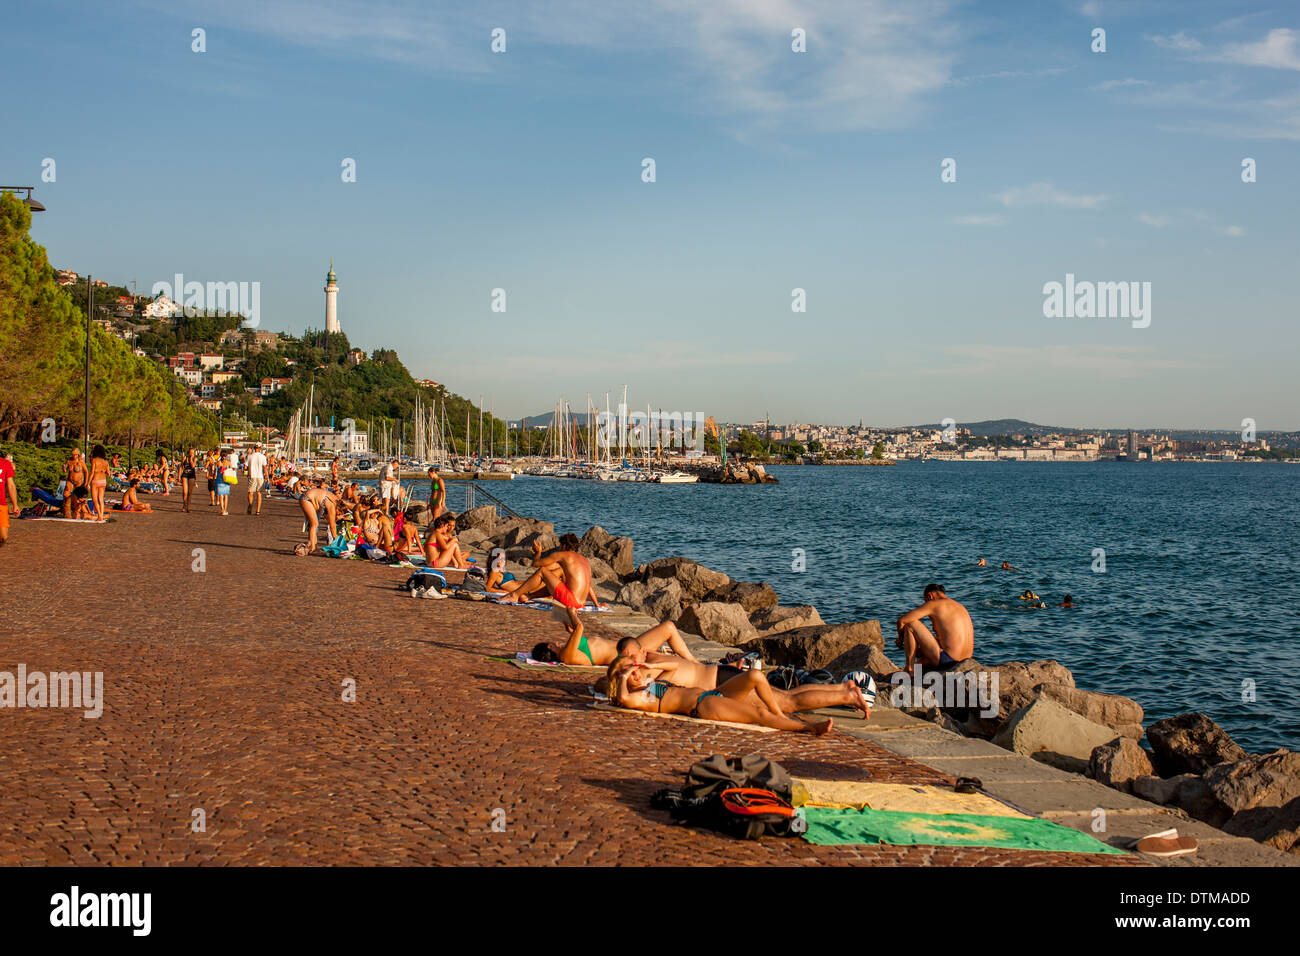 The beautiful city of Trieste planted in front of the Adriatic Sea Stock Photo